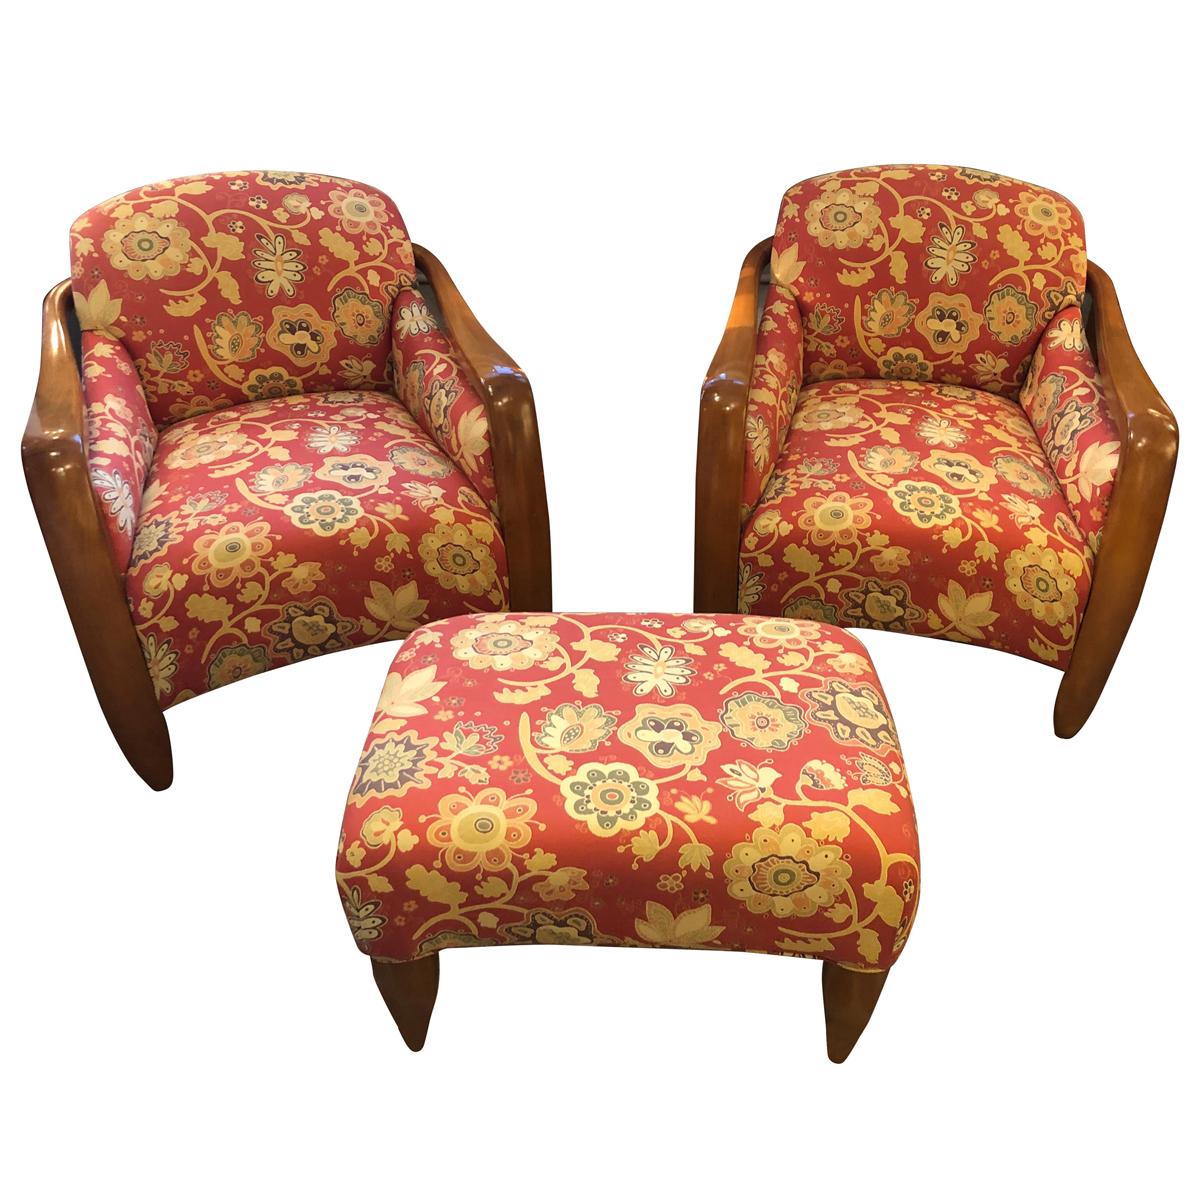 Welcoming Set of Classy Art Deco Club Chairs and Matching Ottoman